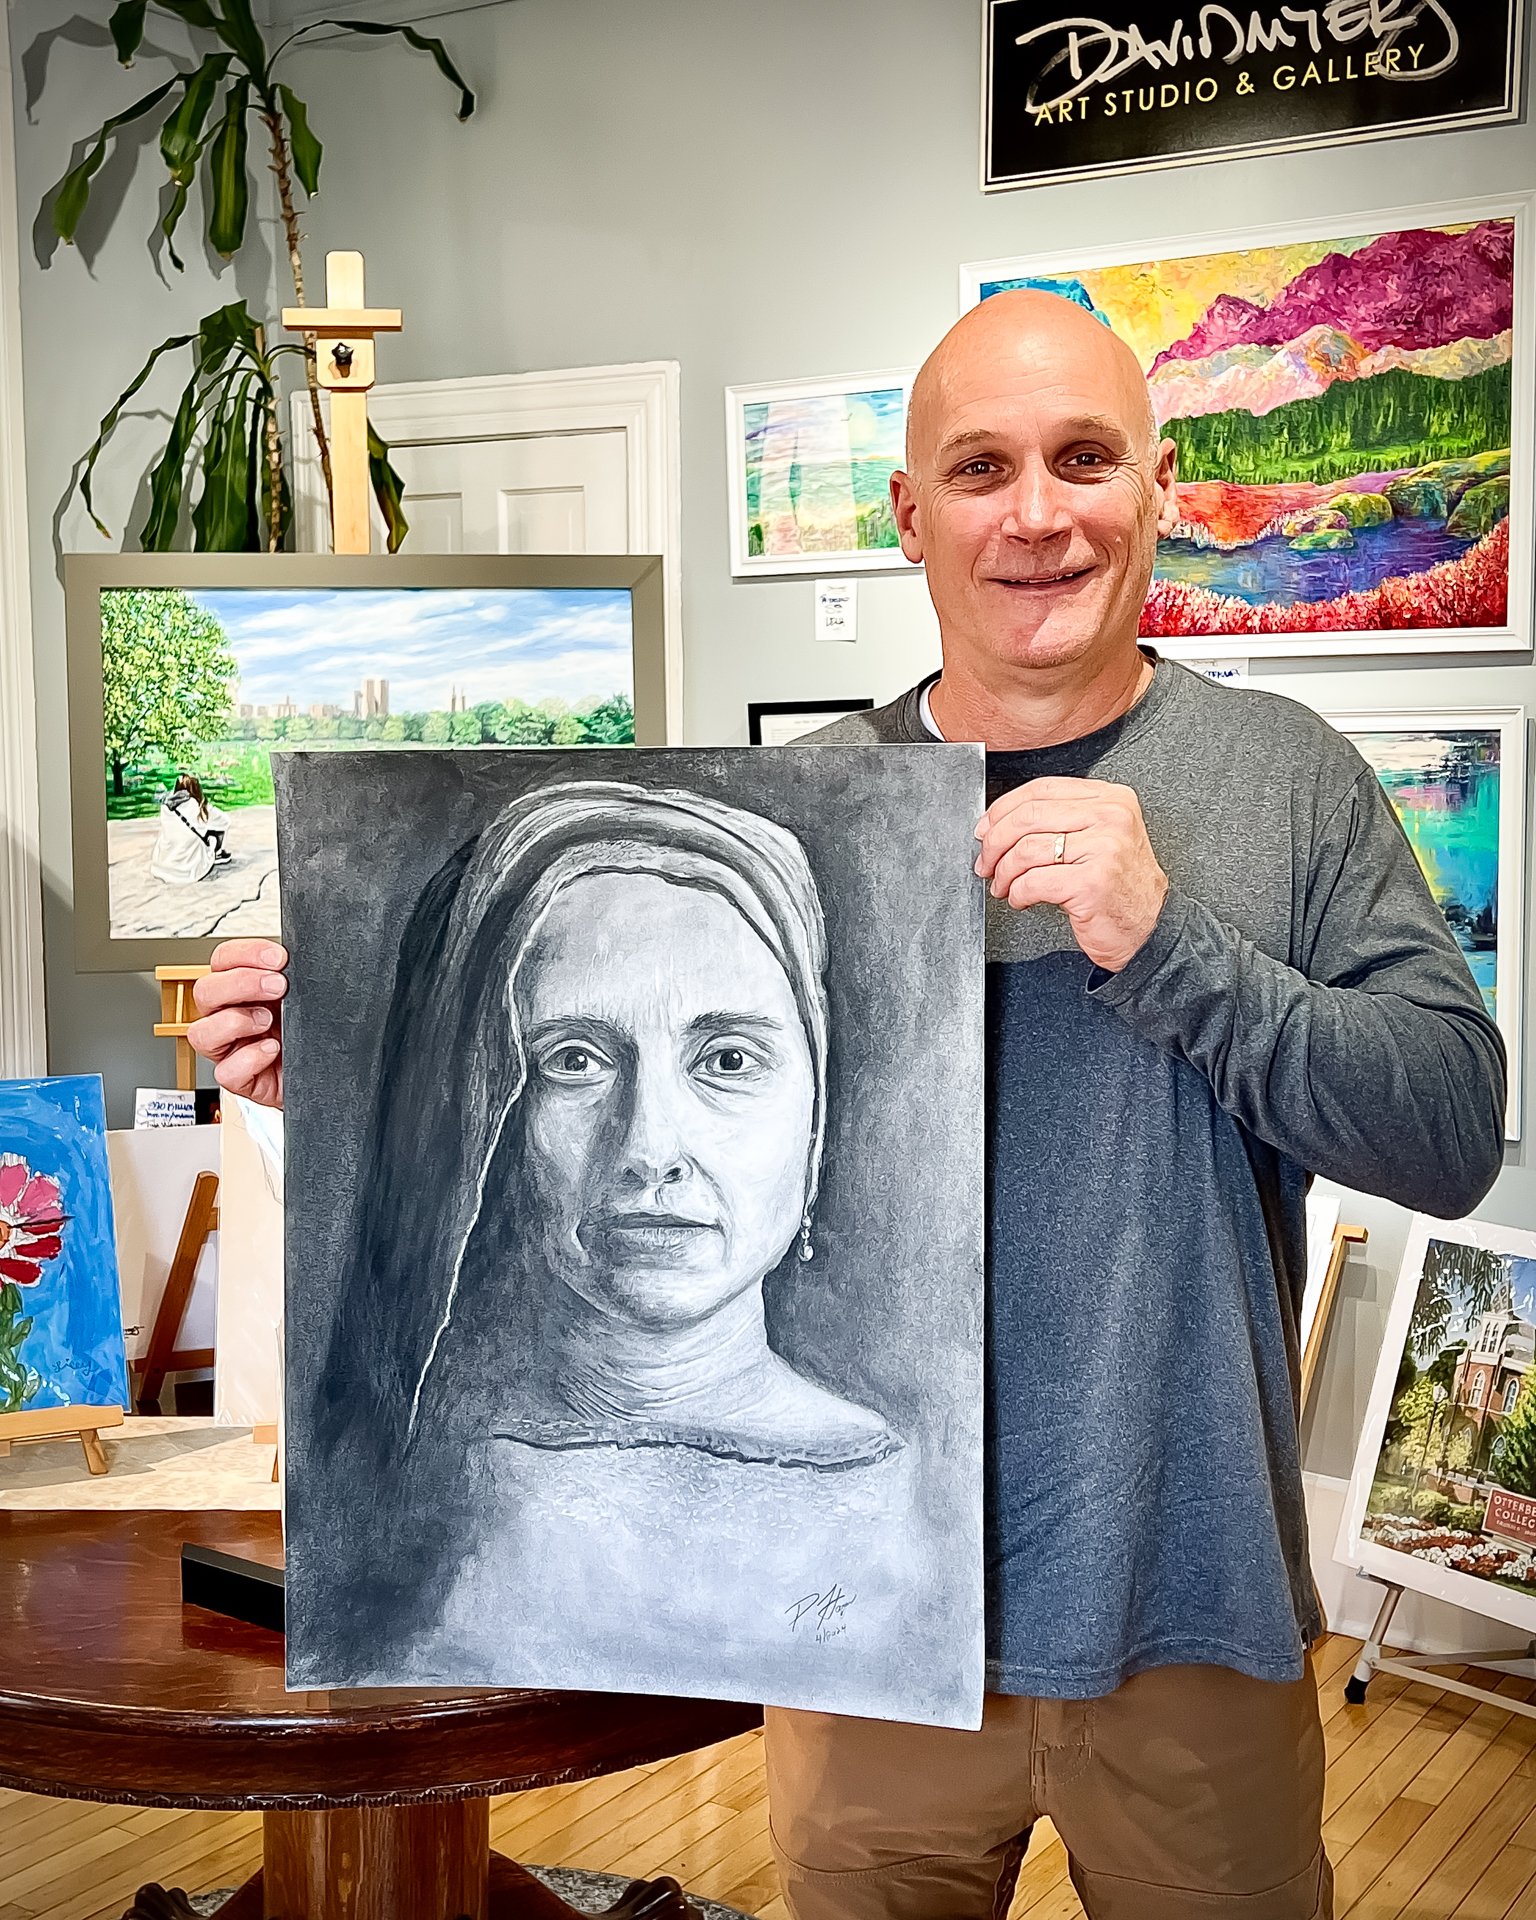 Studio Artist Pat Hogan with his charcoal illustration of Mother Mary in &ldquo;The Chosen&rdquo;as portrayed by Vanessa Benavente. 

#TheChosen #VanessaBenavente #MotherMary #PrivateArtInstruction #Mentoring #CreateEmbraceInspire #ArtintheHeartofUpt